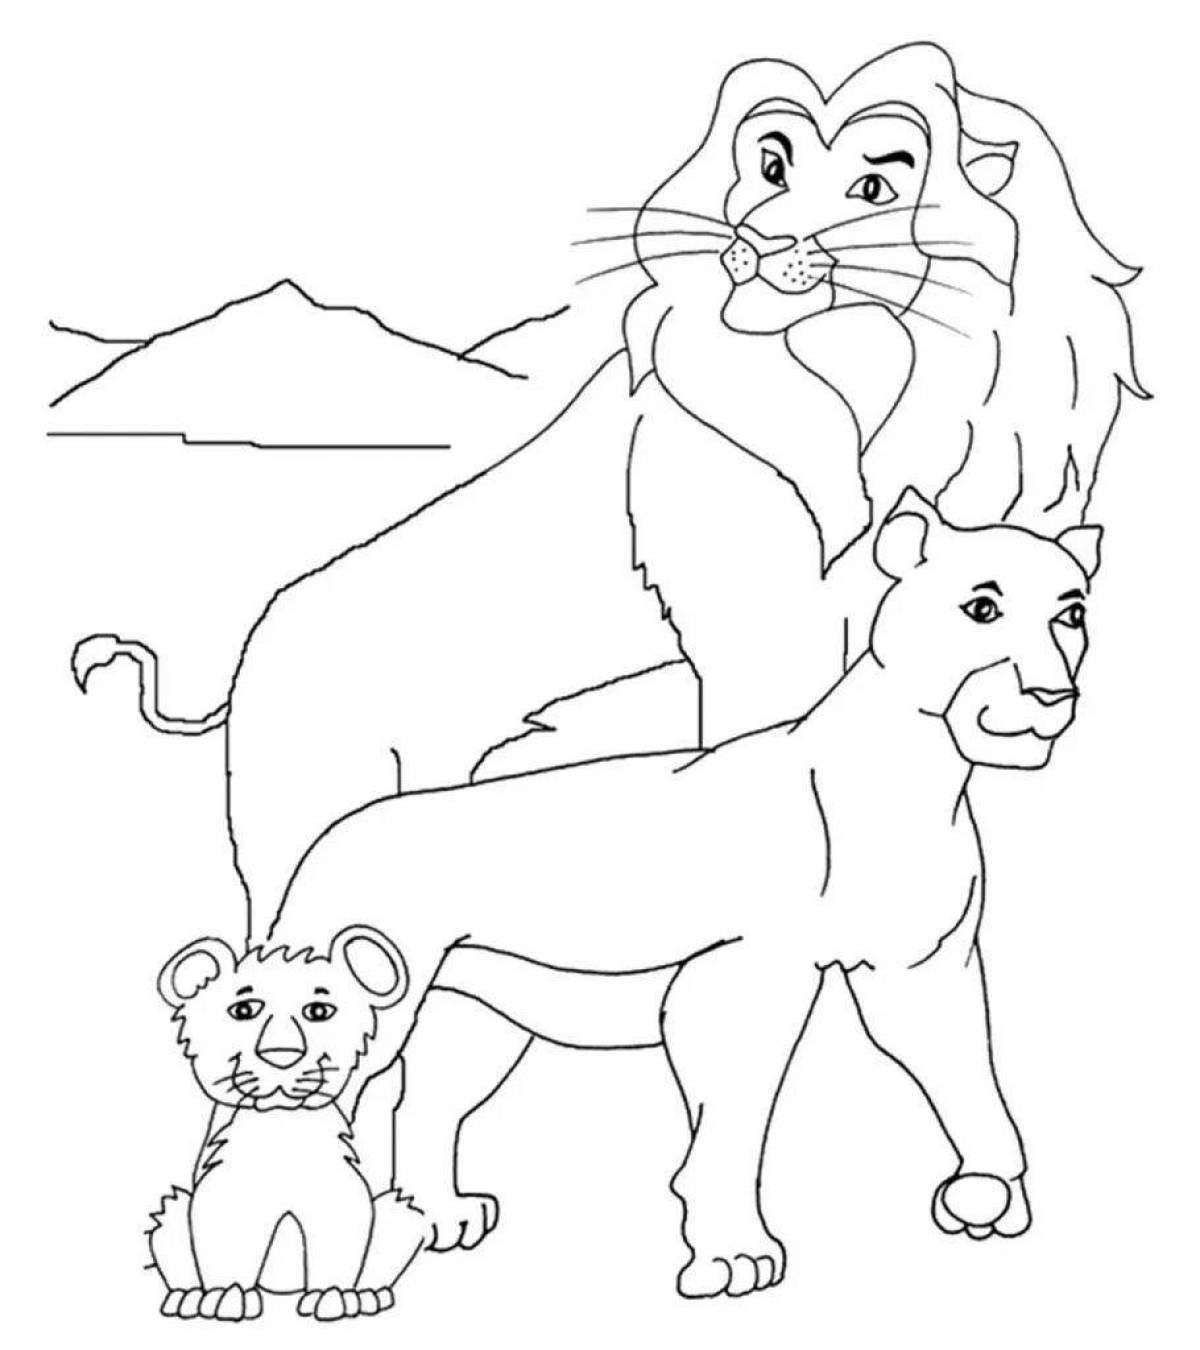 Coloring page regal looking lioness